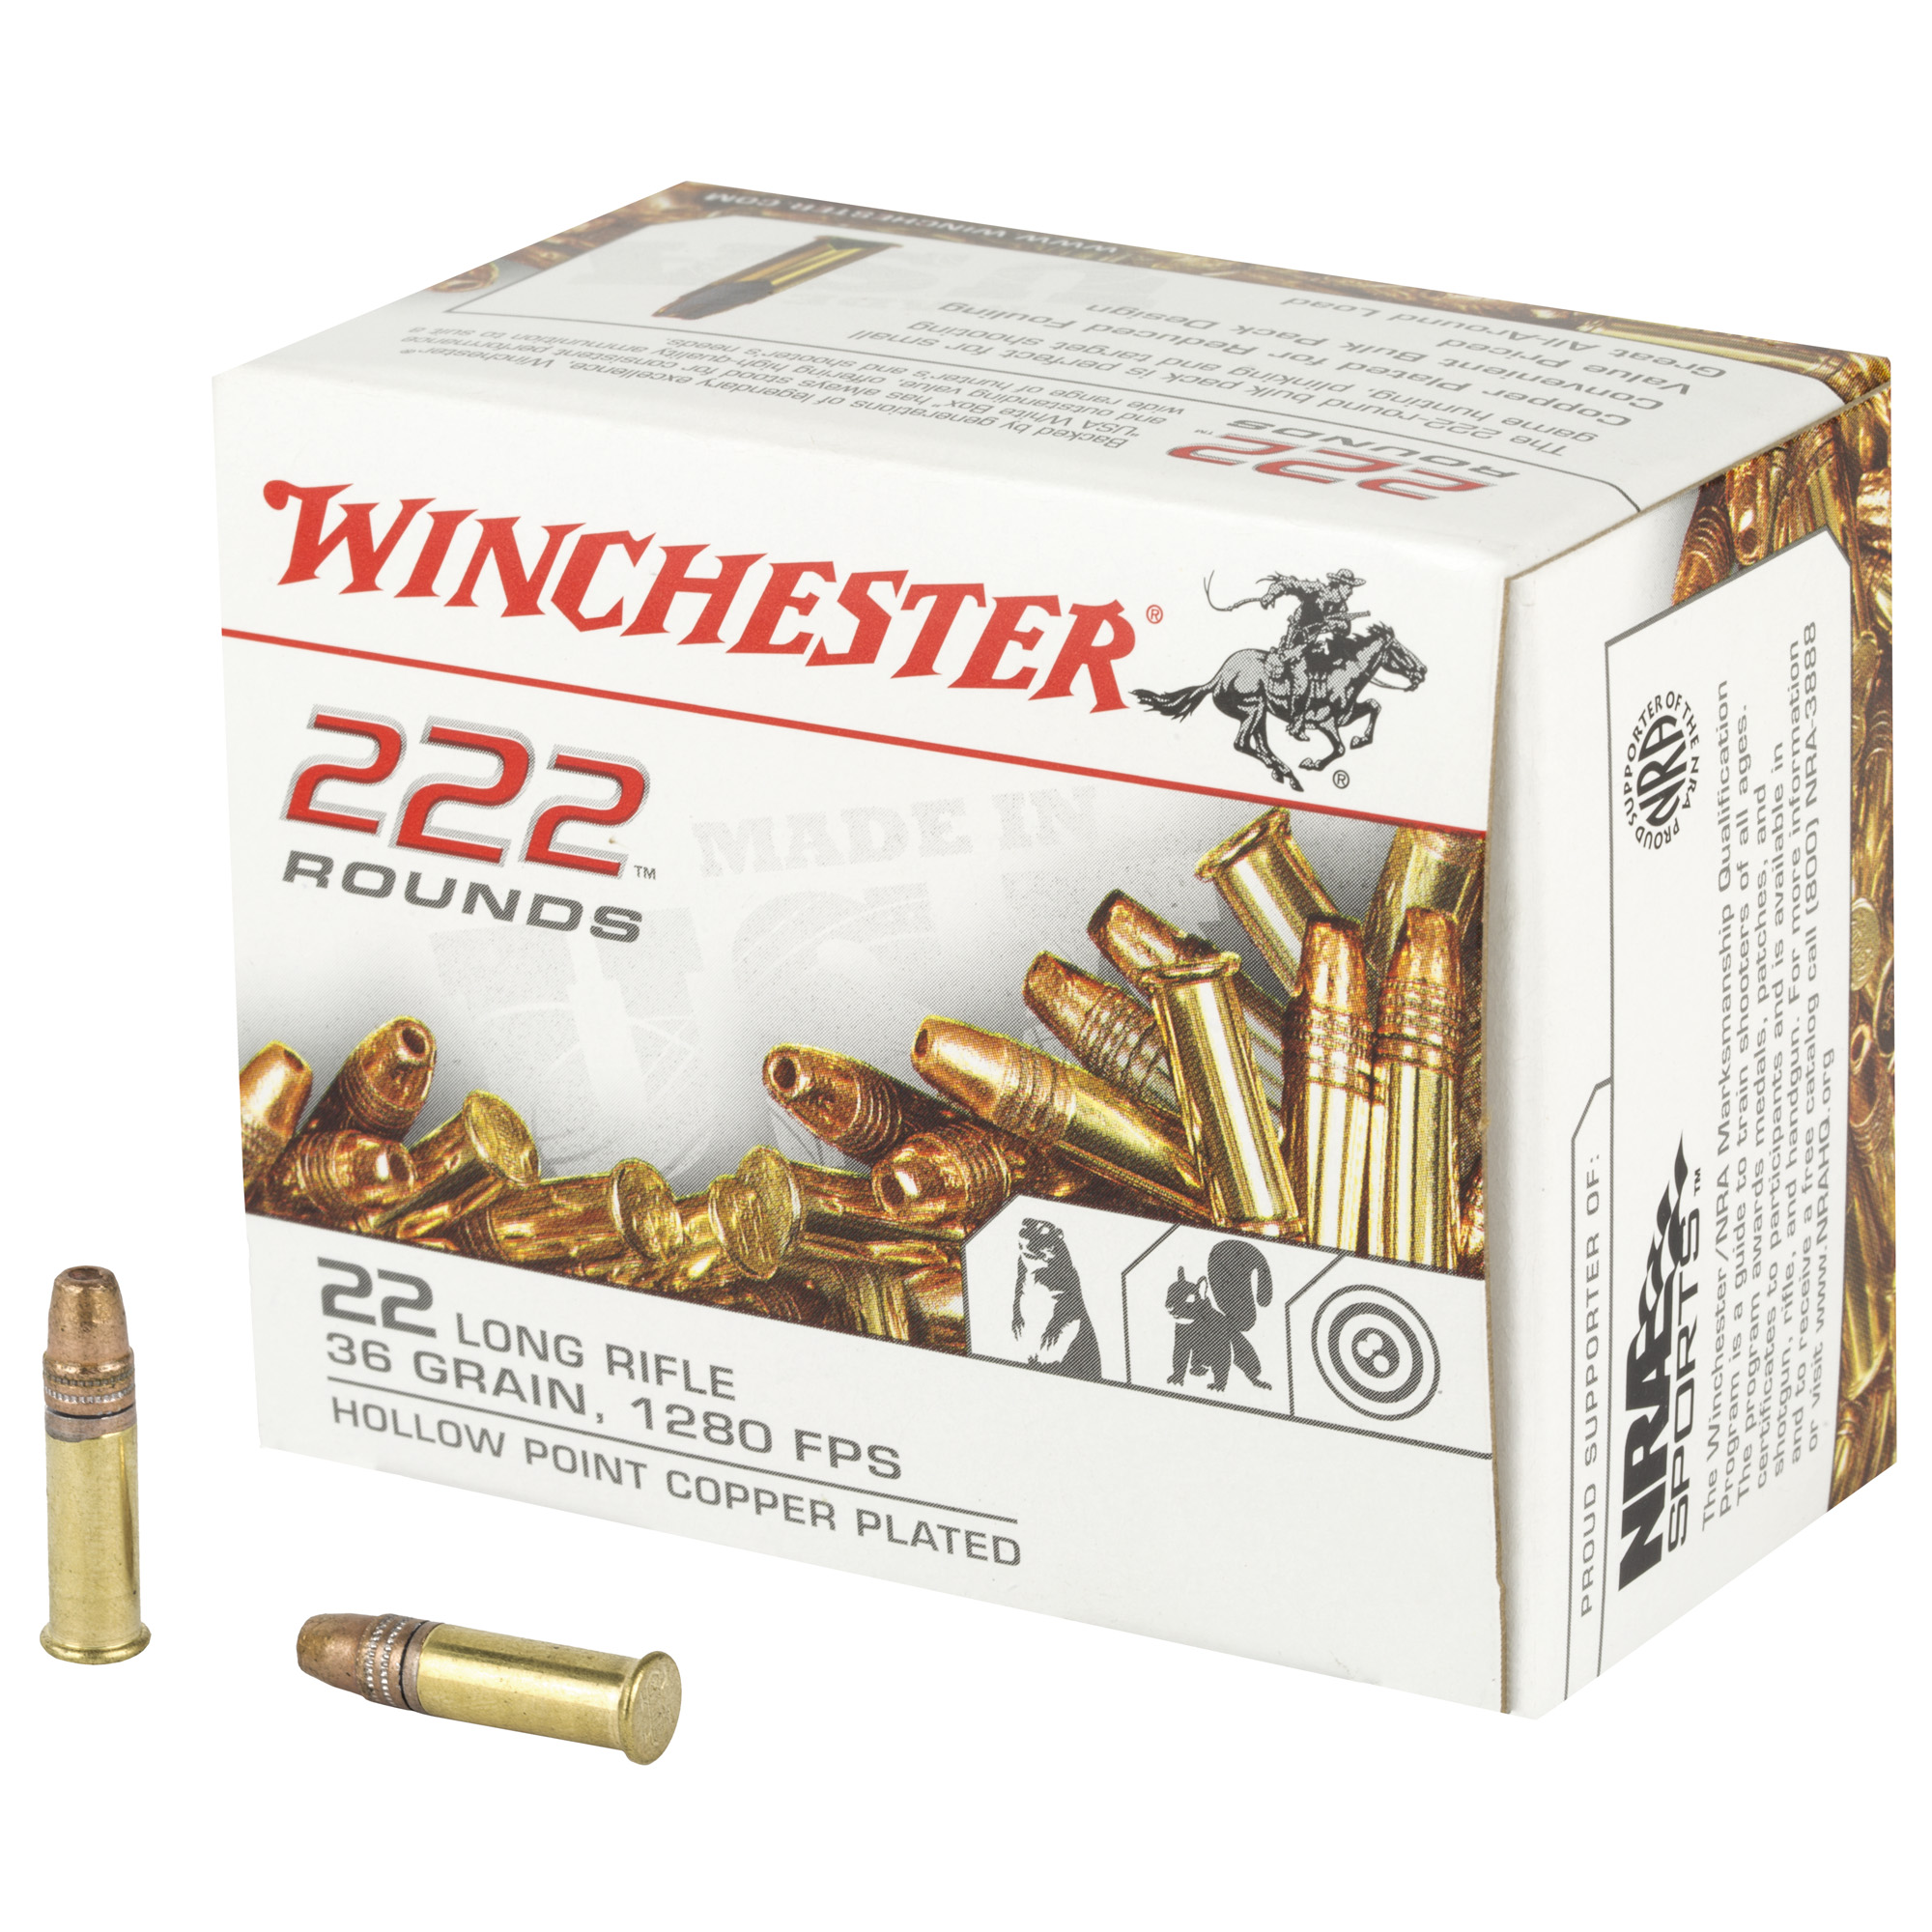 Winchester .22LR Ammunition 36gr Copper Plated Hollow Point (222 Rounds)